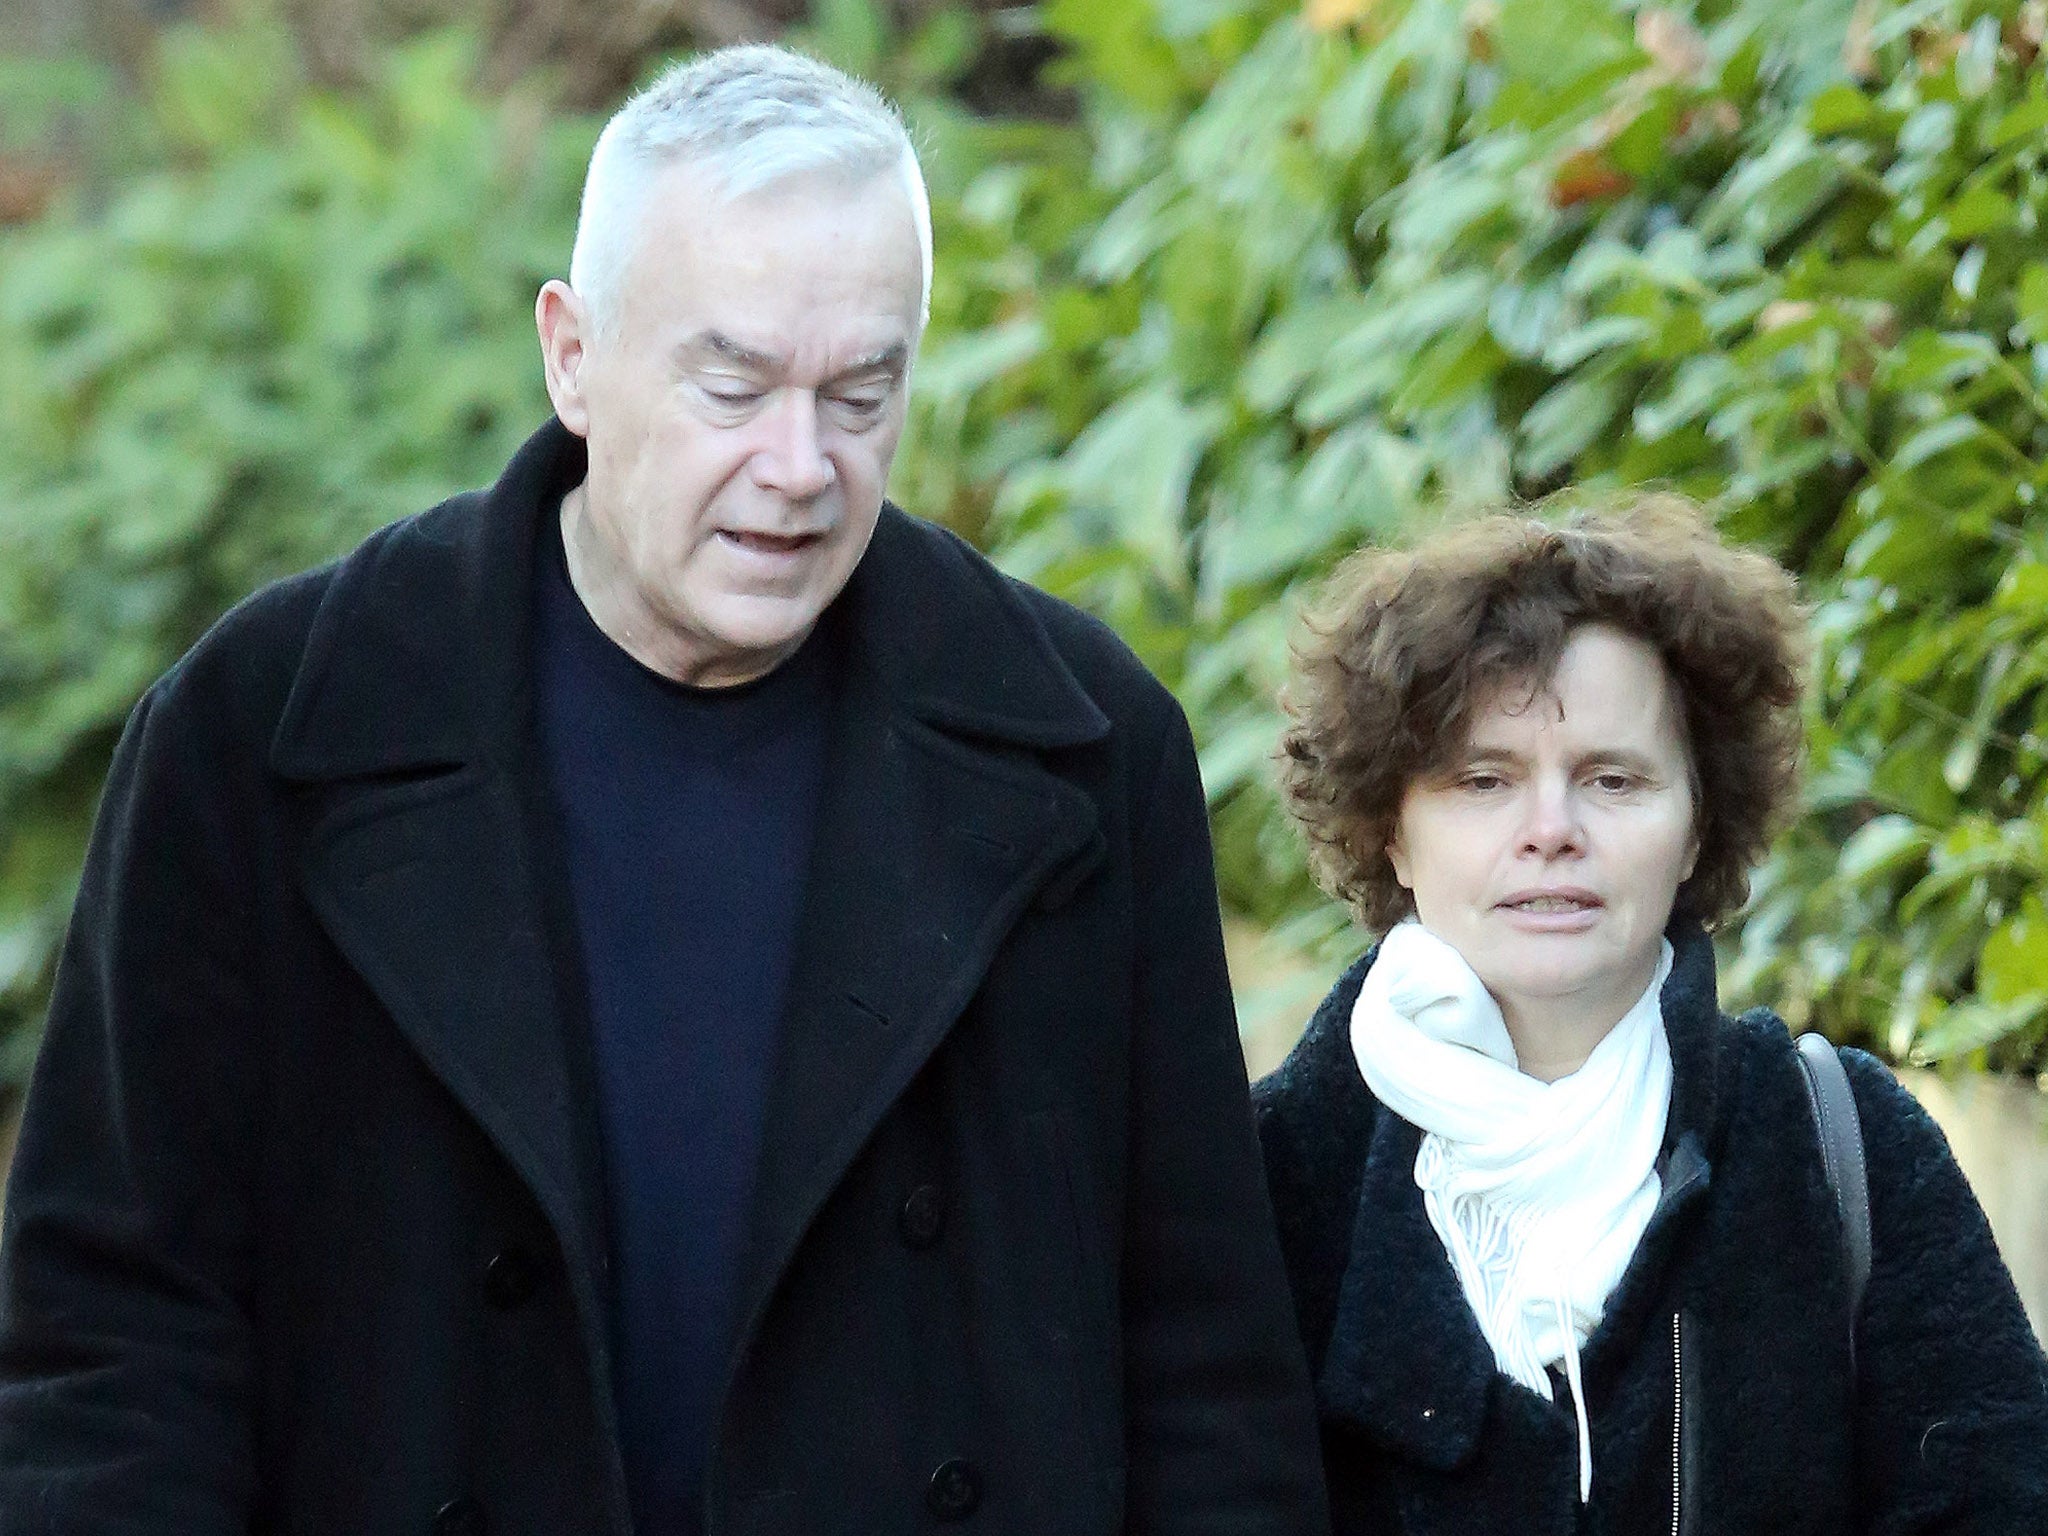 Huw Edwards in hospital as he is named in BBC sex scandal The Independent picture